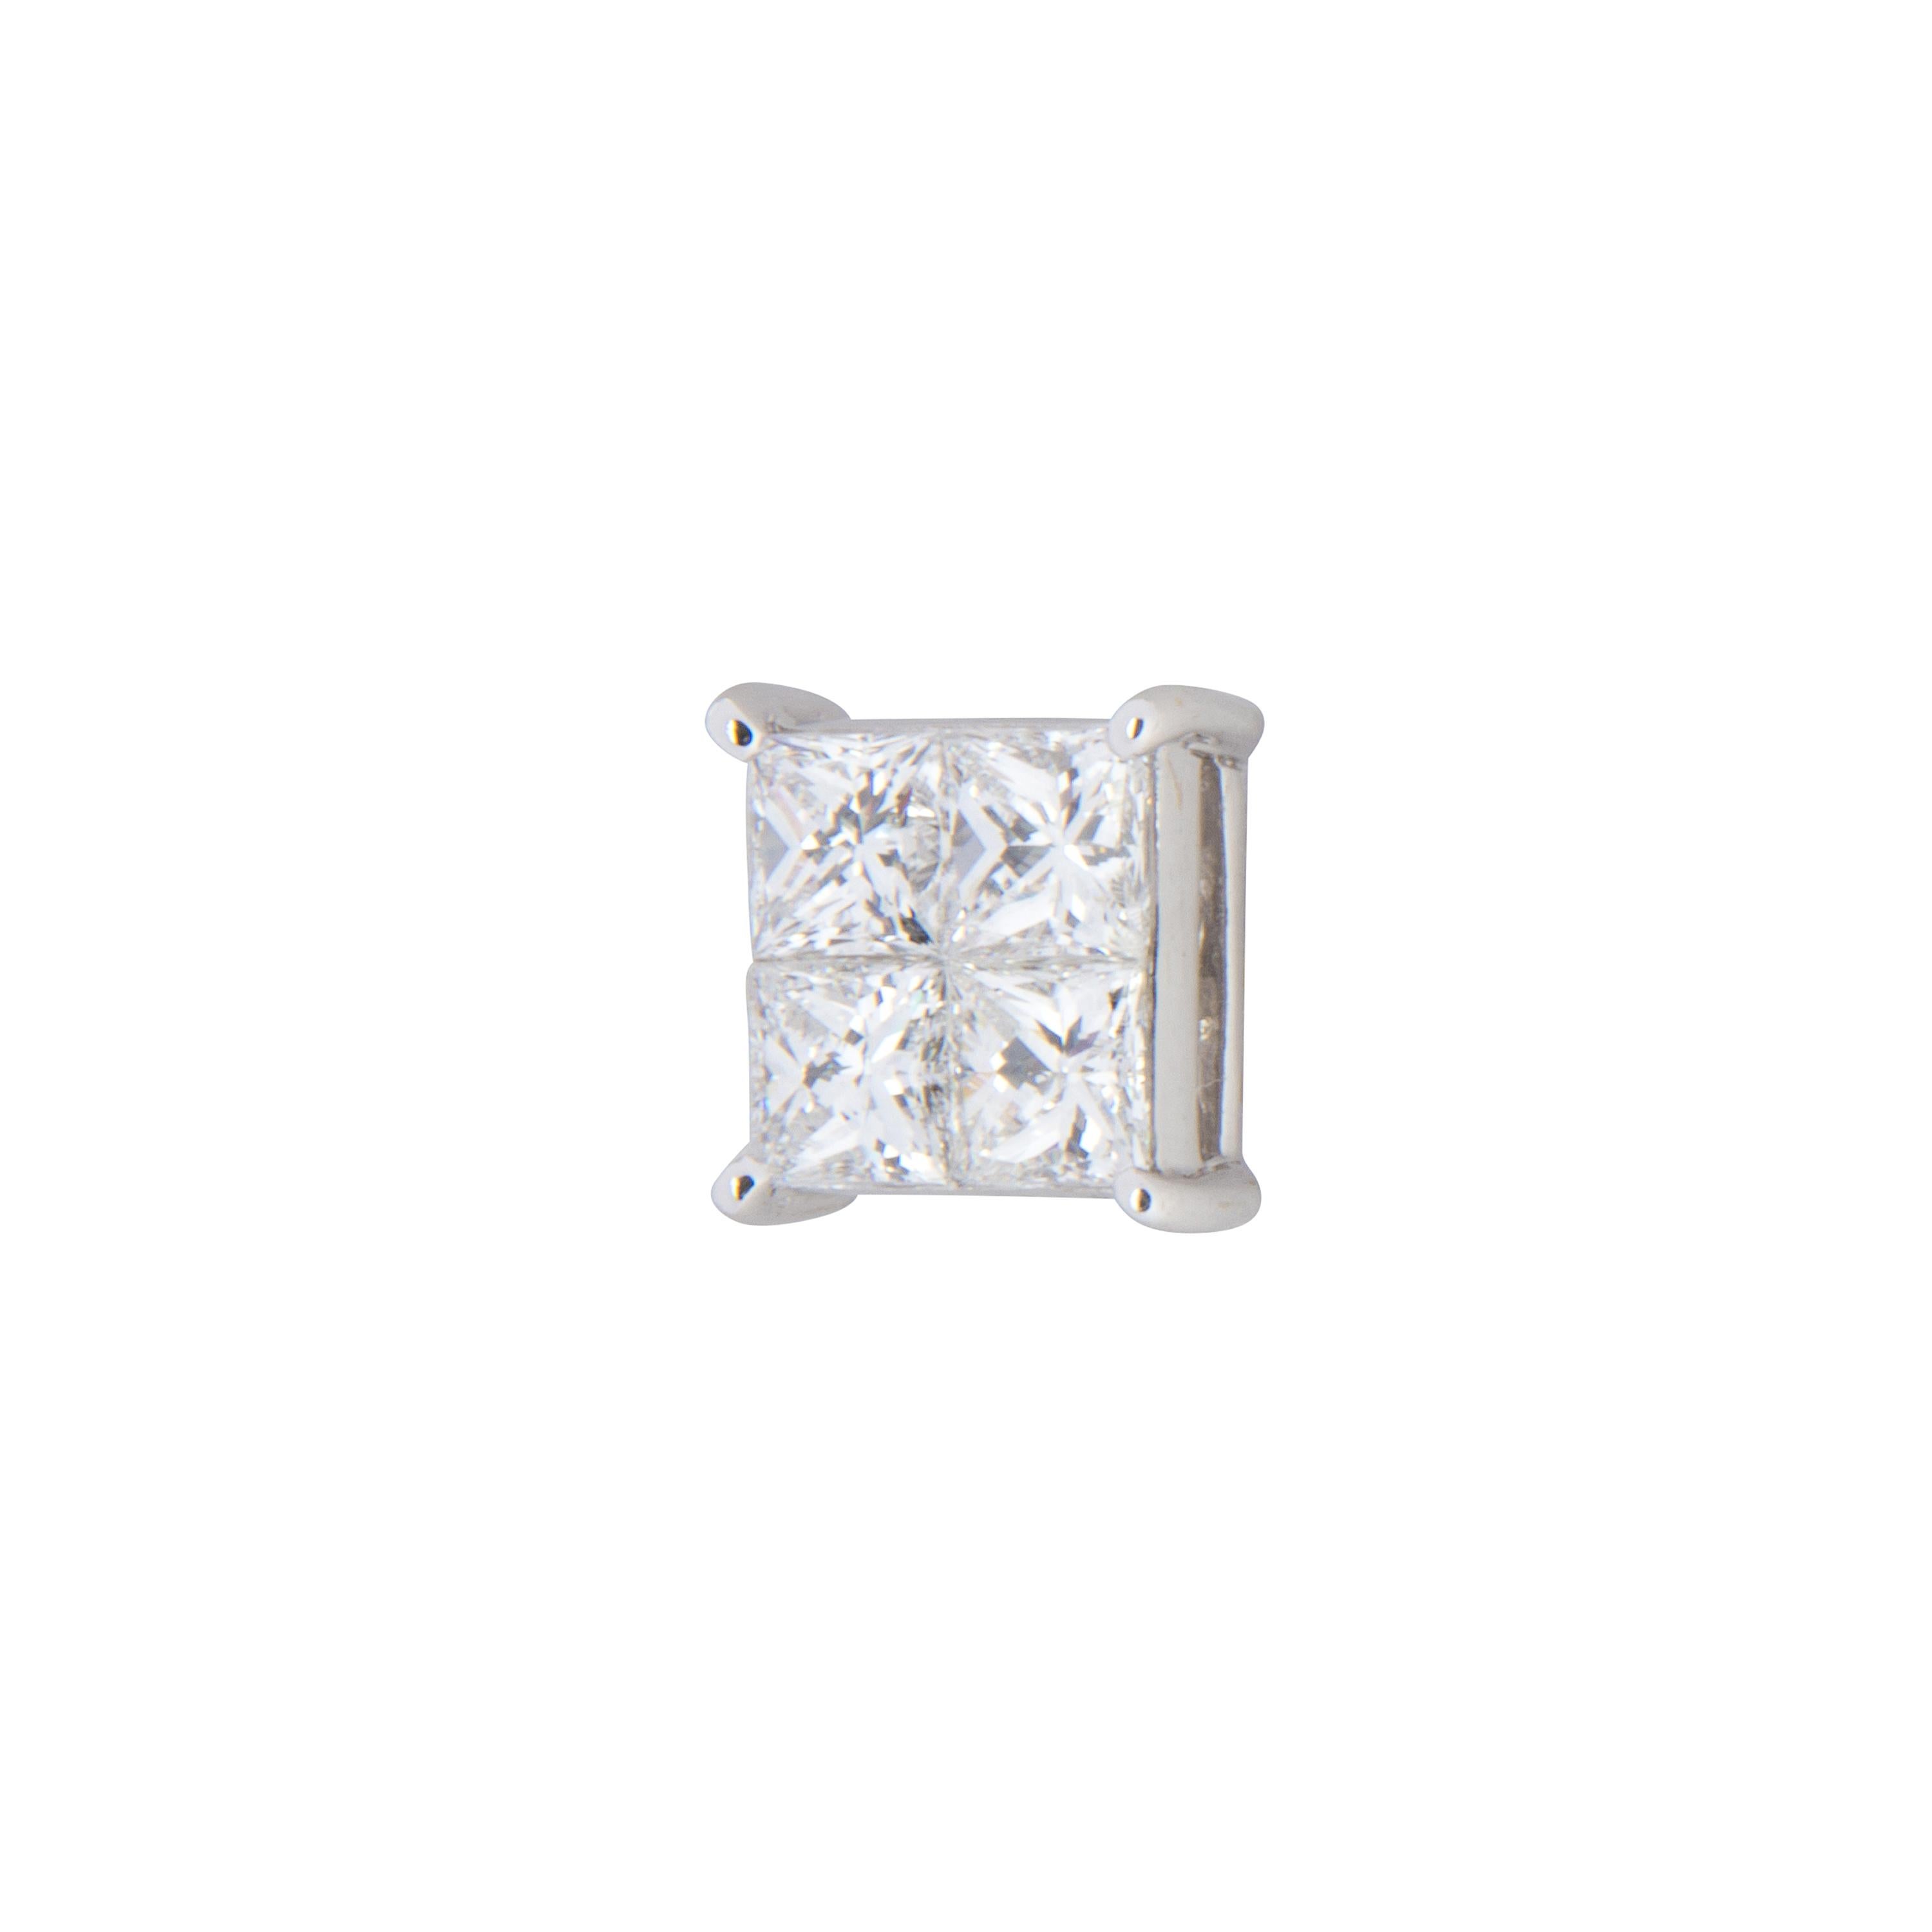 18 karat white gold cluster diamond earrings featuring 8 princess cut diamonds totalling 2.04ct, F colour and VS clarity.